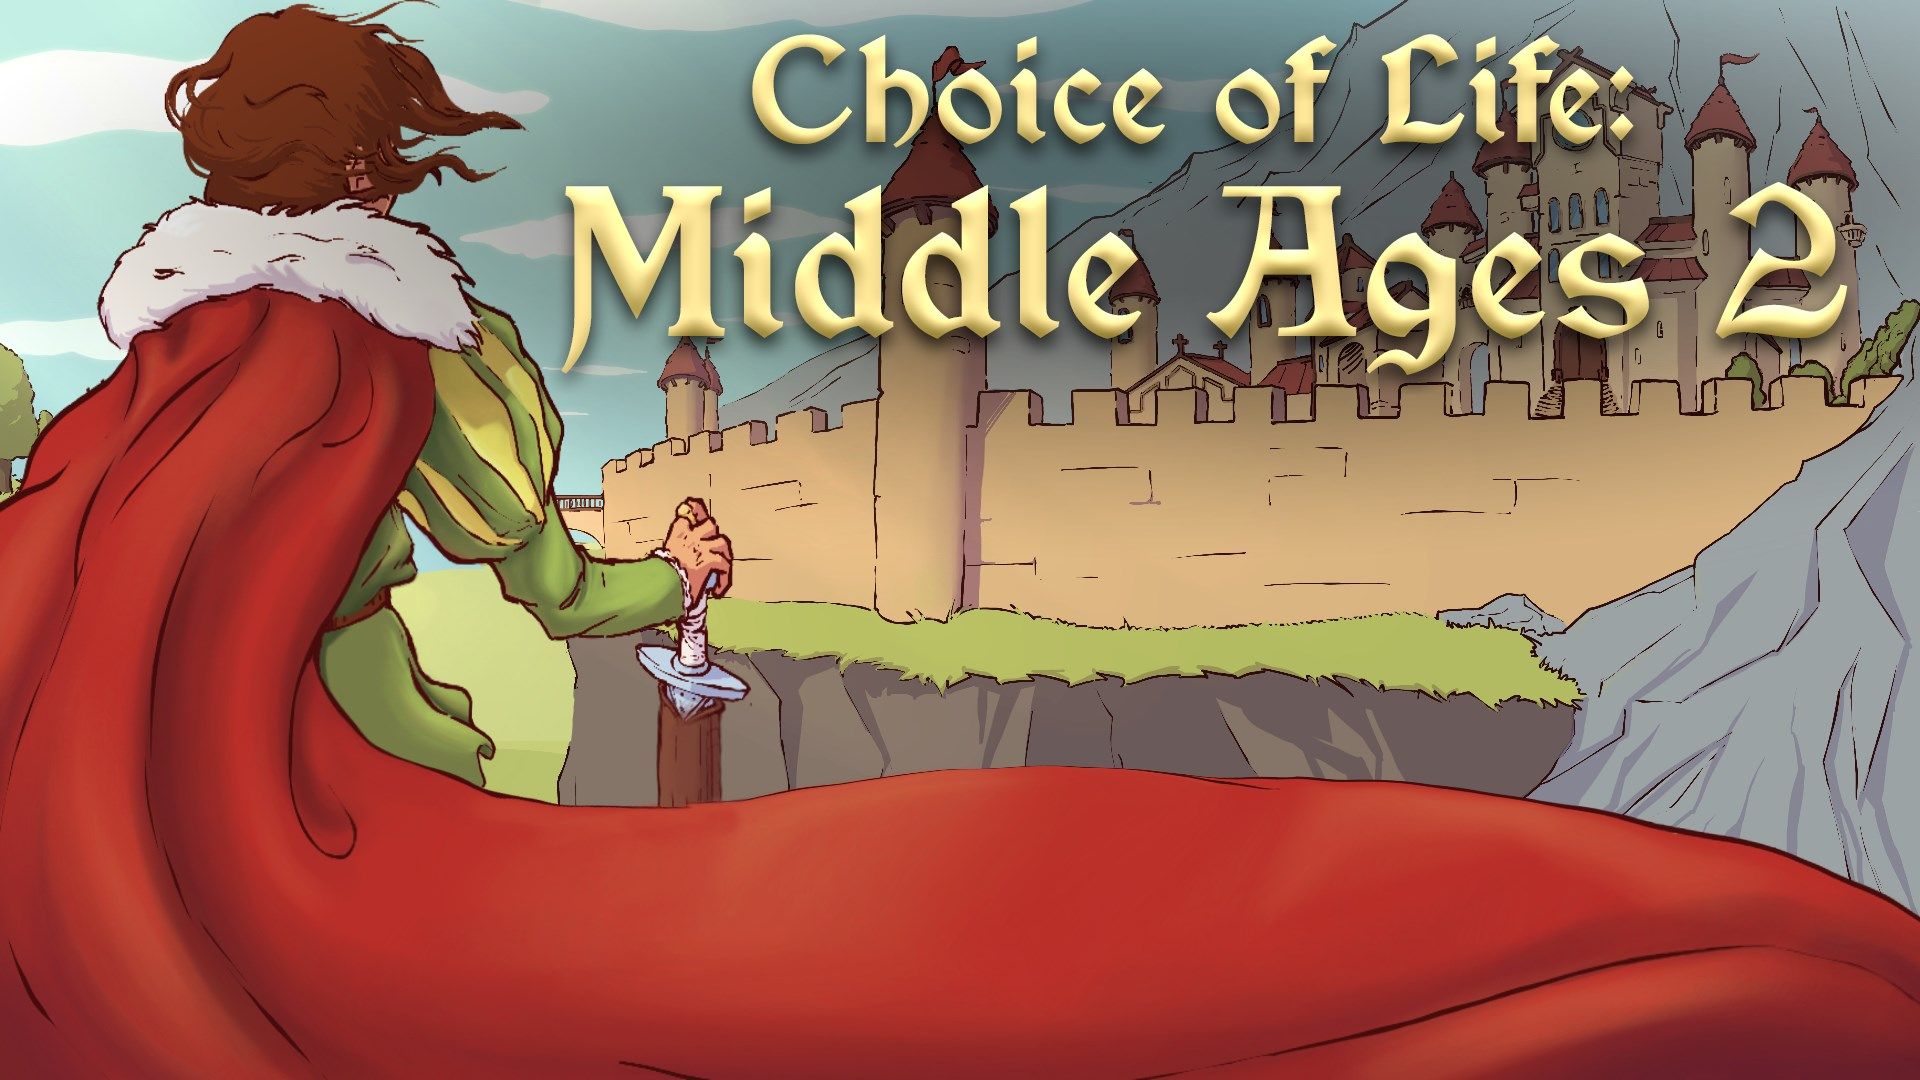 Choice of Life: Middle Ages 2 Image Asset